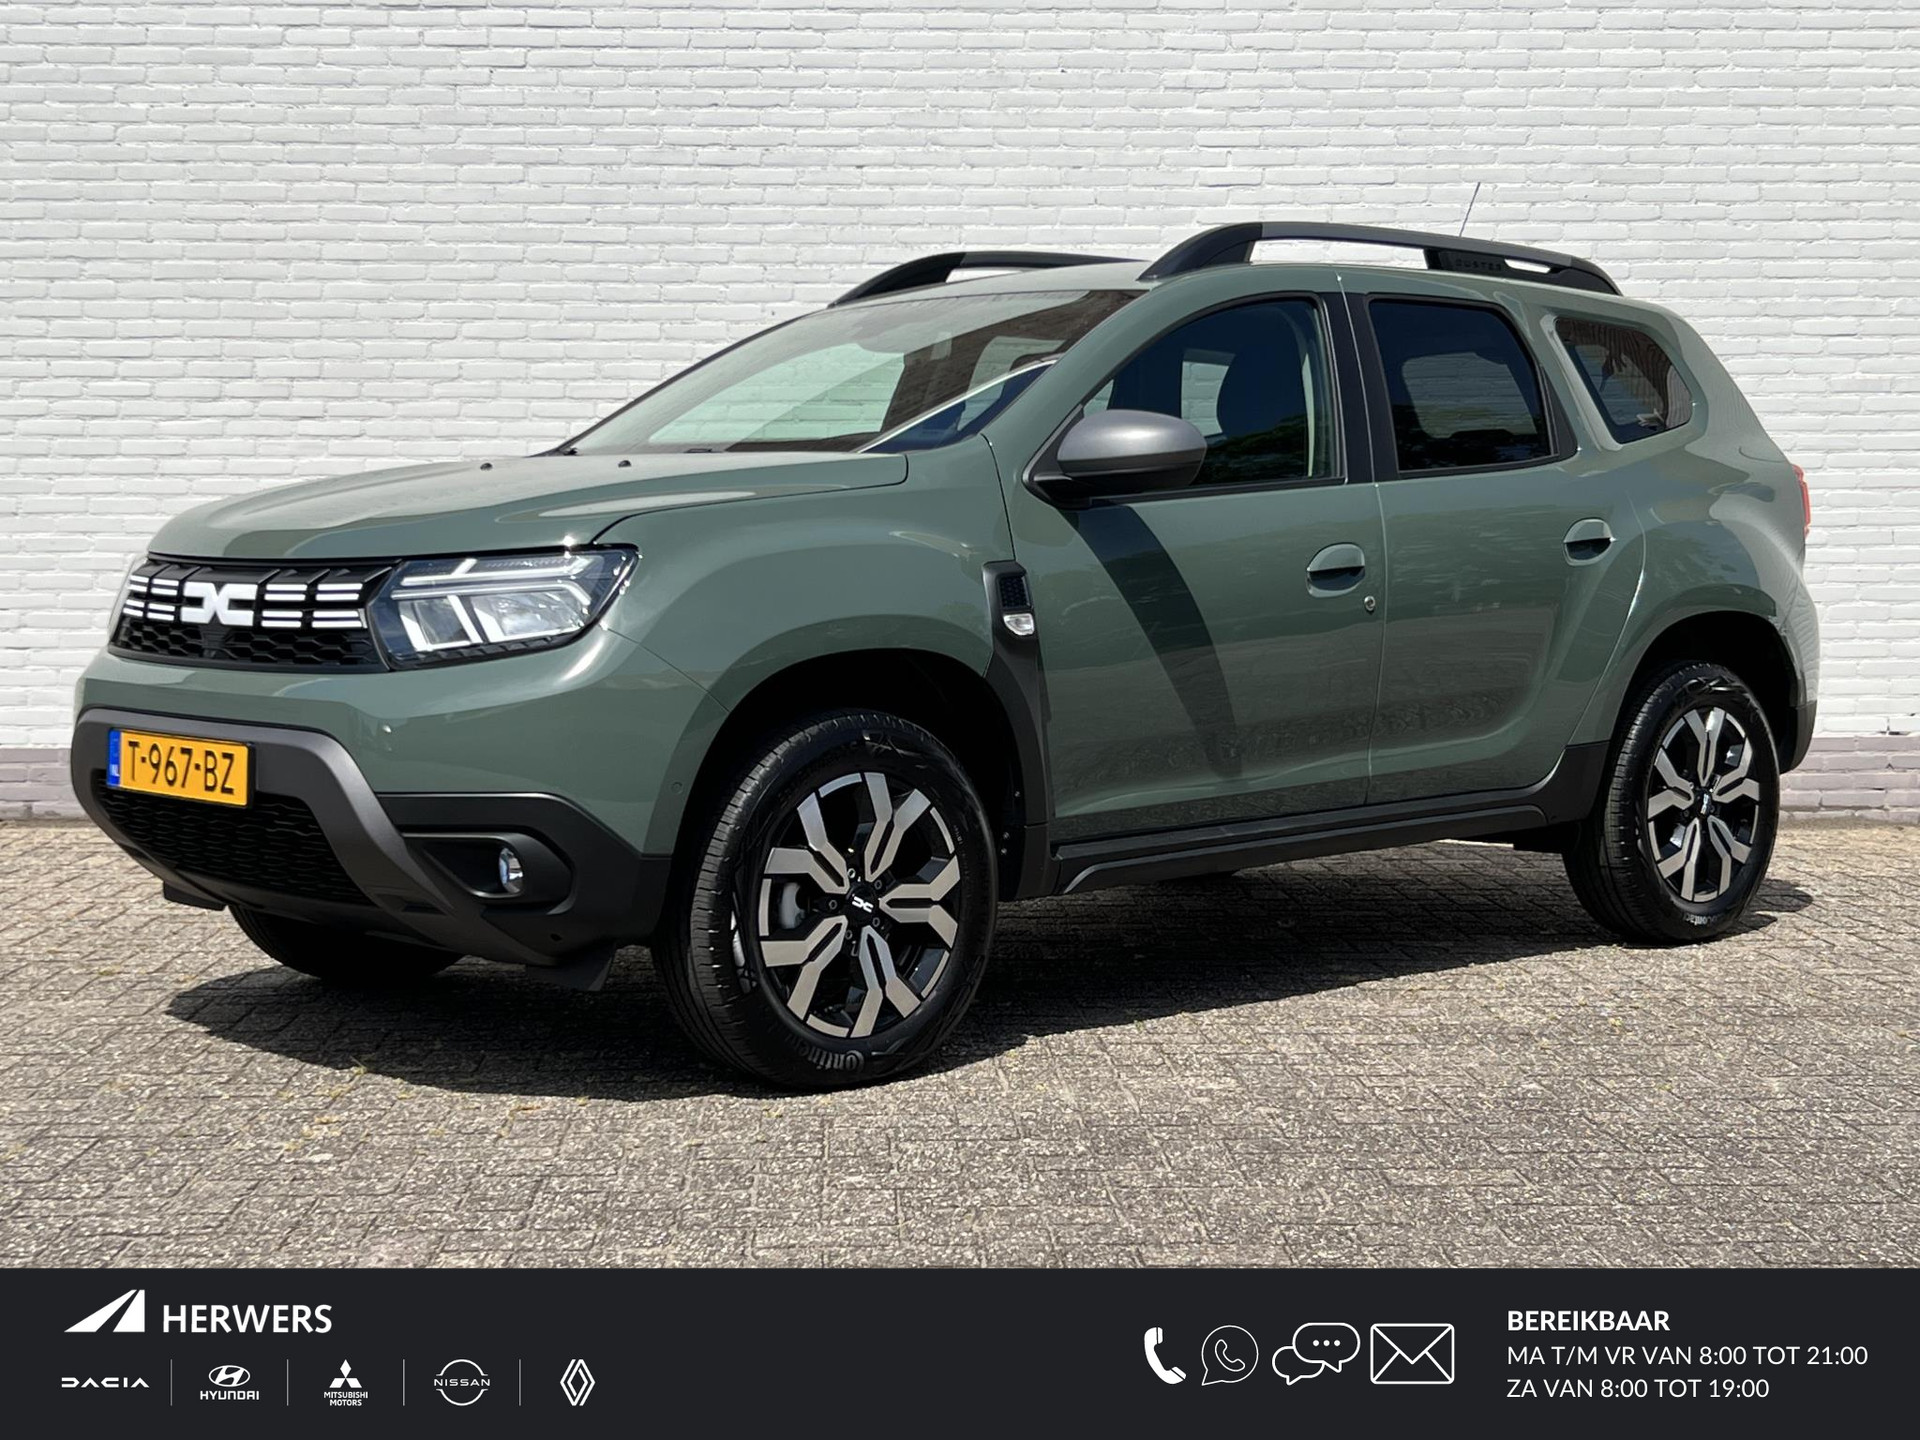 Dacia Duster 1.3 TCe 130 Journey / 360 Camera / Parkeersensoren voor + Achter / Apple Carplay & Android Auto / Navi / Cruise / Clima / DAB / LED / Keyless /